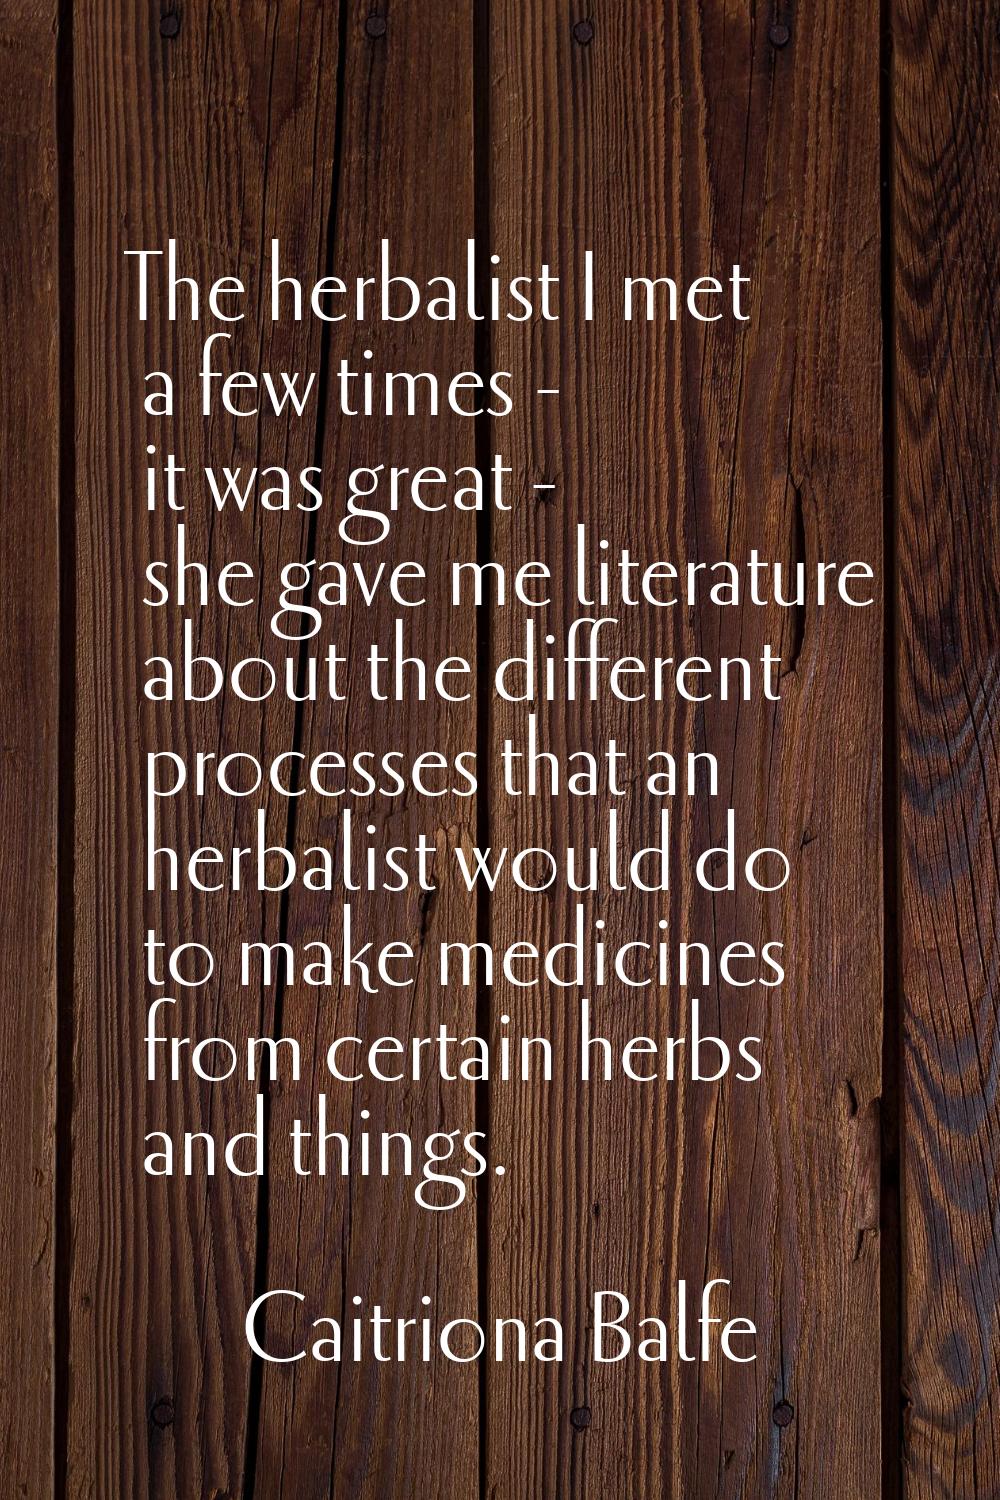 The herbalist I met a few times - it was great - she gave me literature about the different process